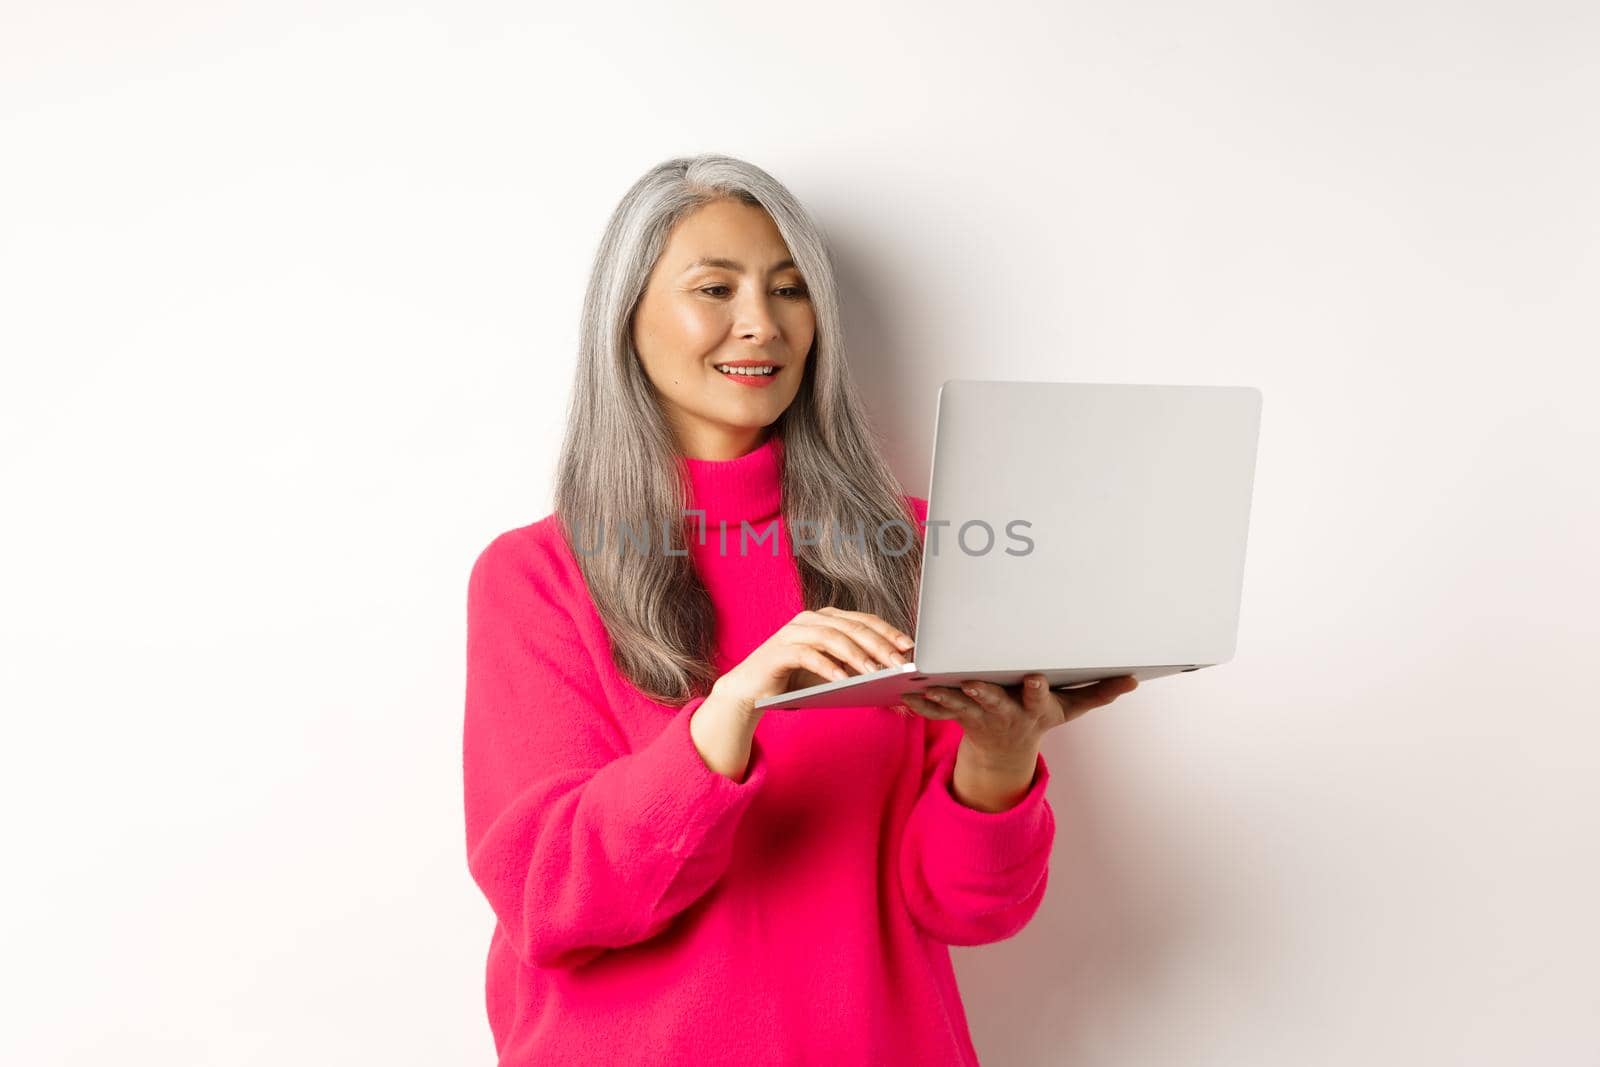 Senior asian woman working freelance, using laptop and smiling, standing over white background.